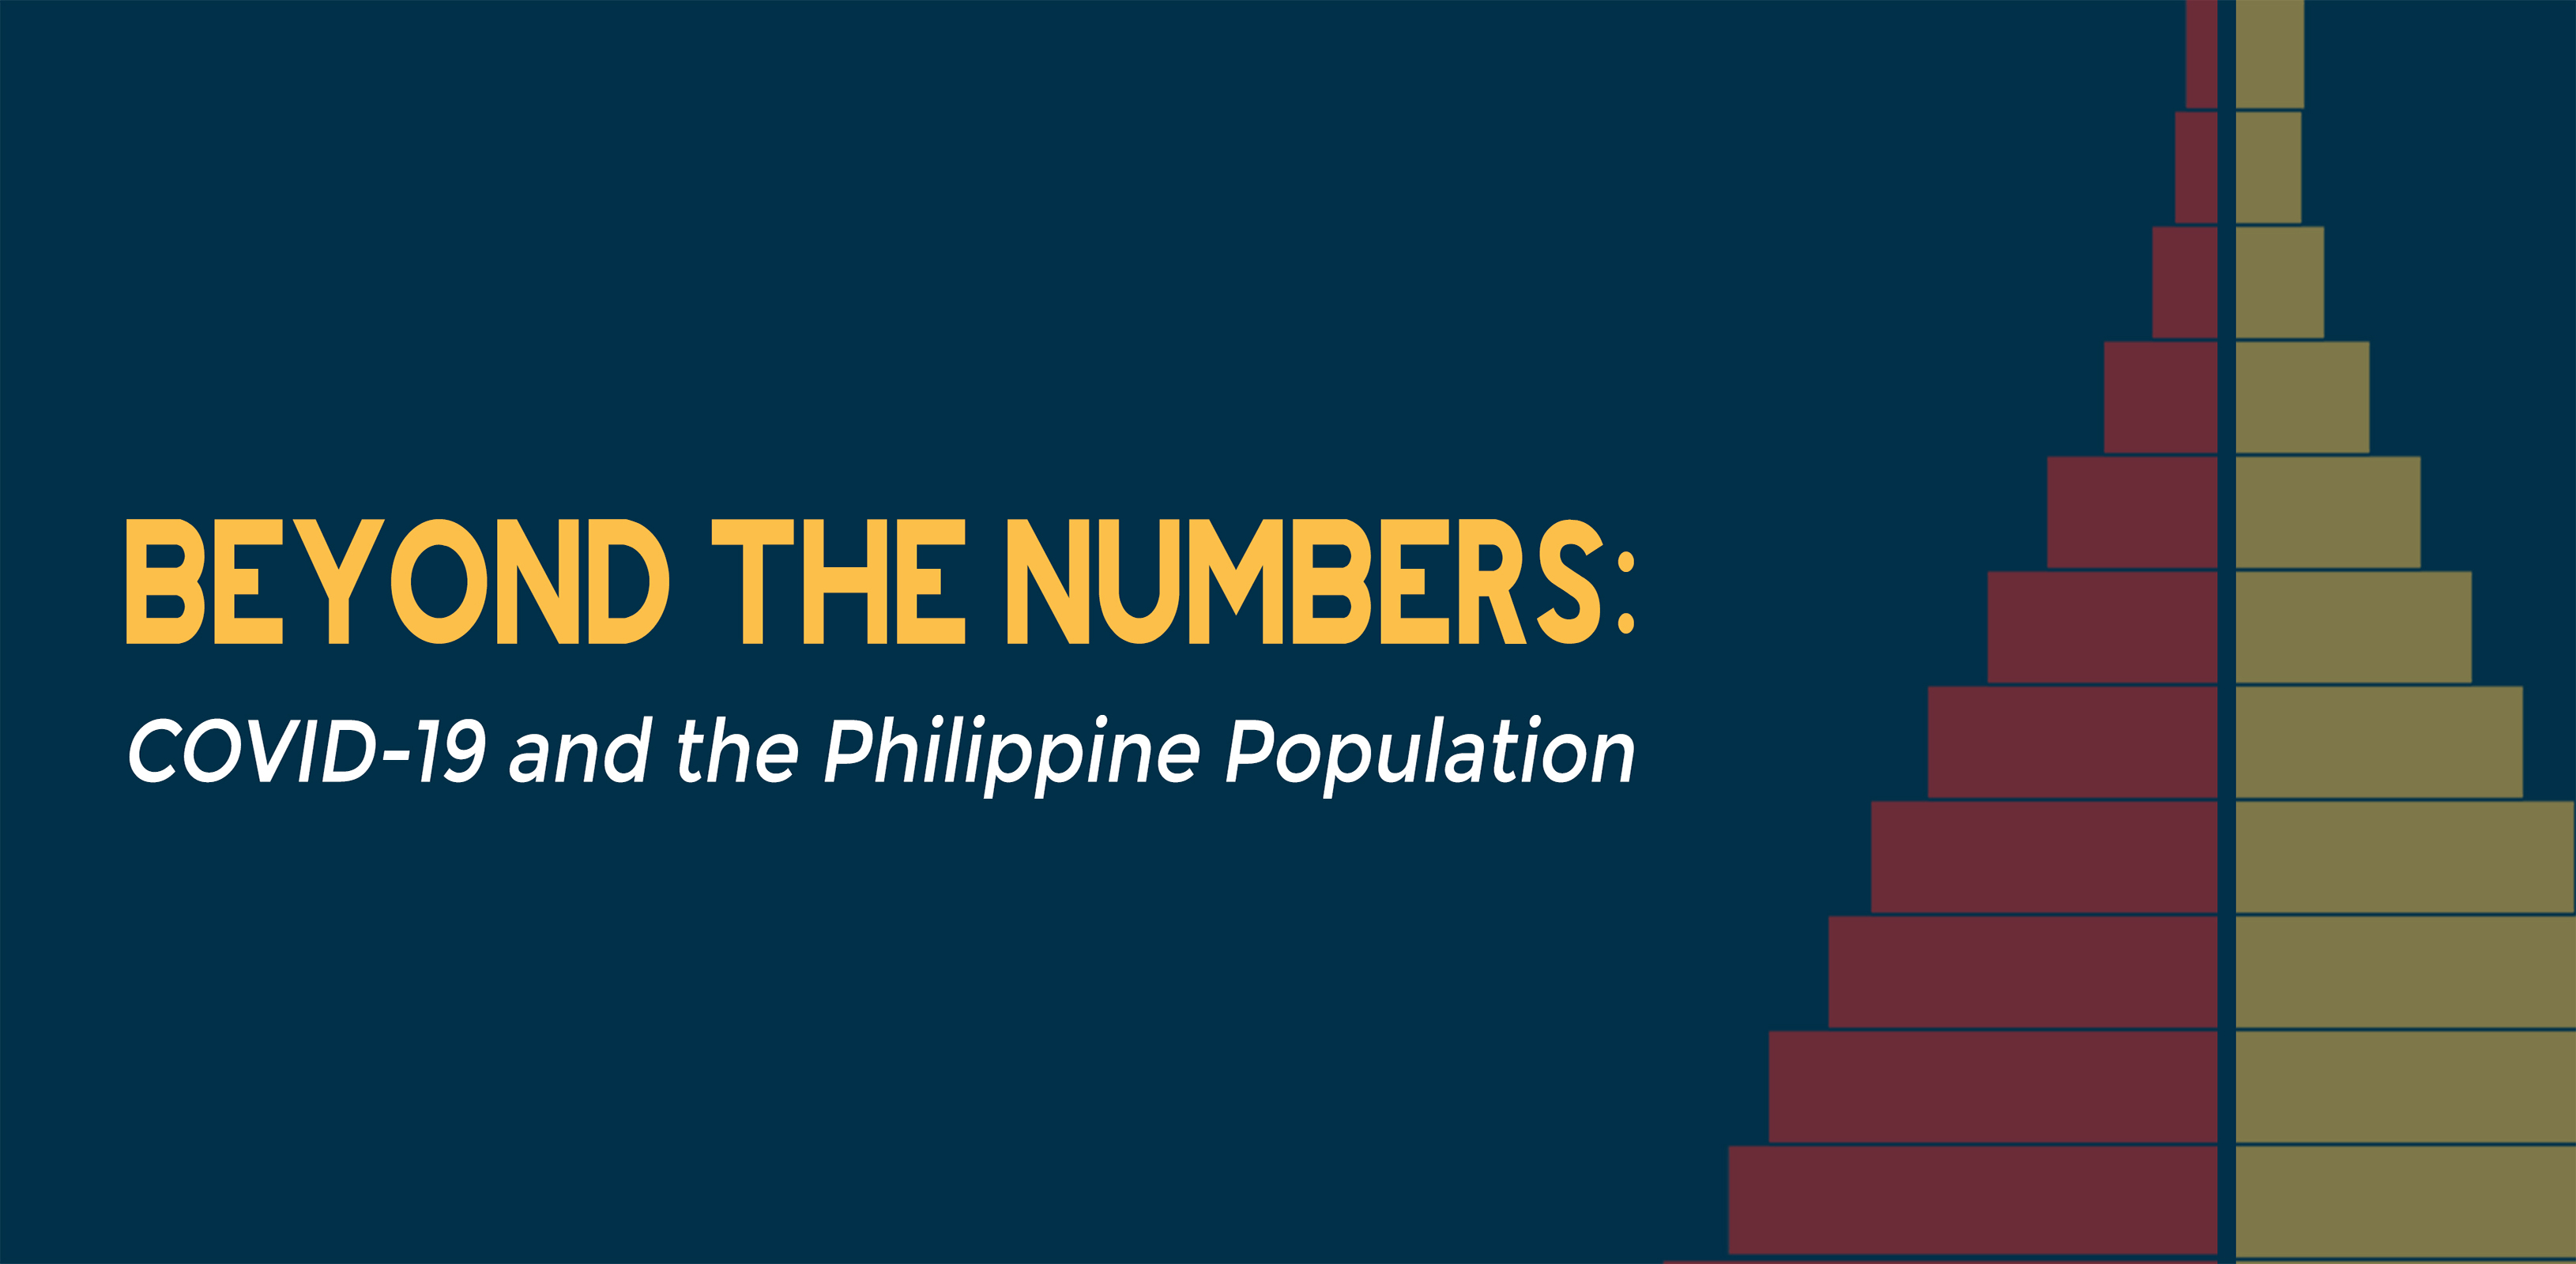 Beyond the Numbers: COVID-19 and the Philippine Population